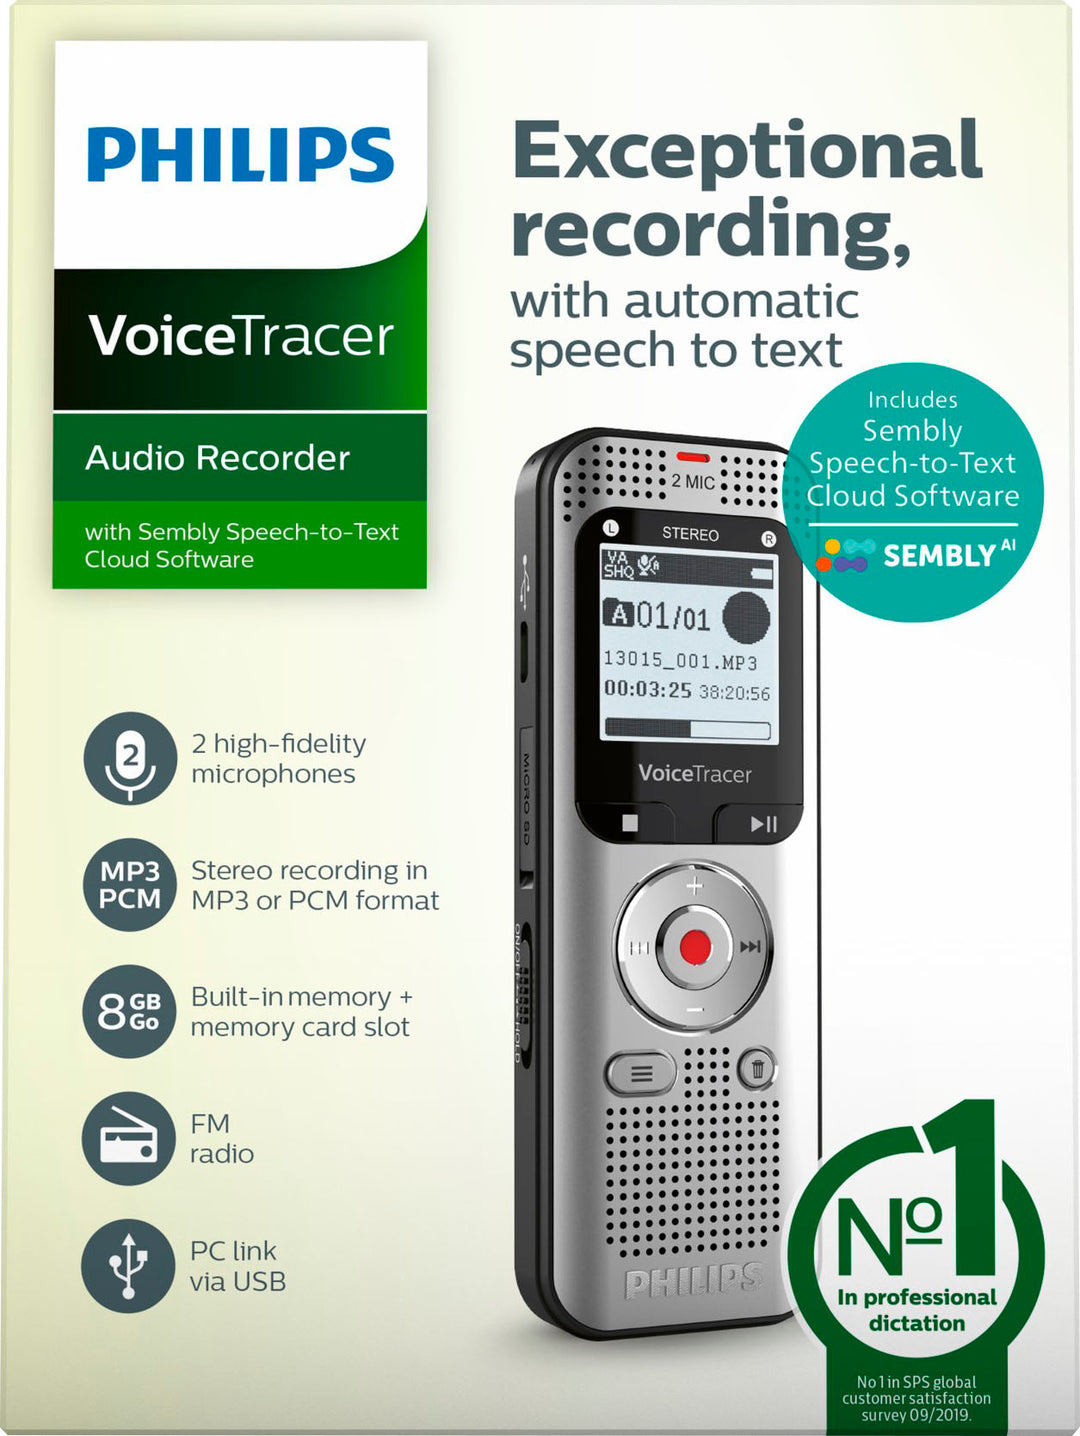 Philips VoiceTracer DVT2015 8GB Voice Recorder with Sembly Cloud Speech-to-Text Software_5